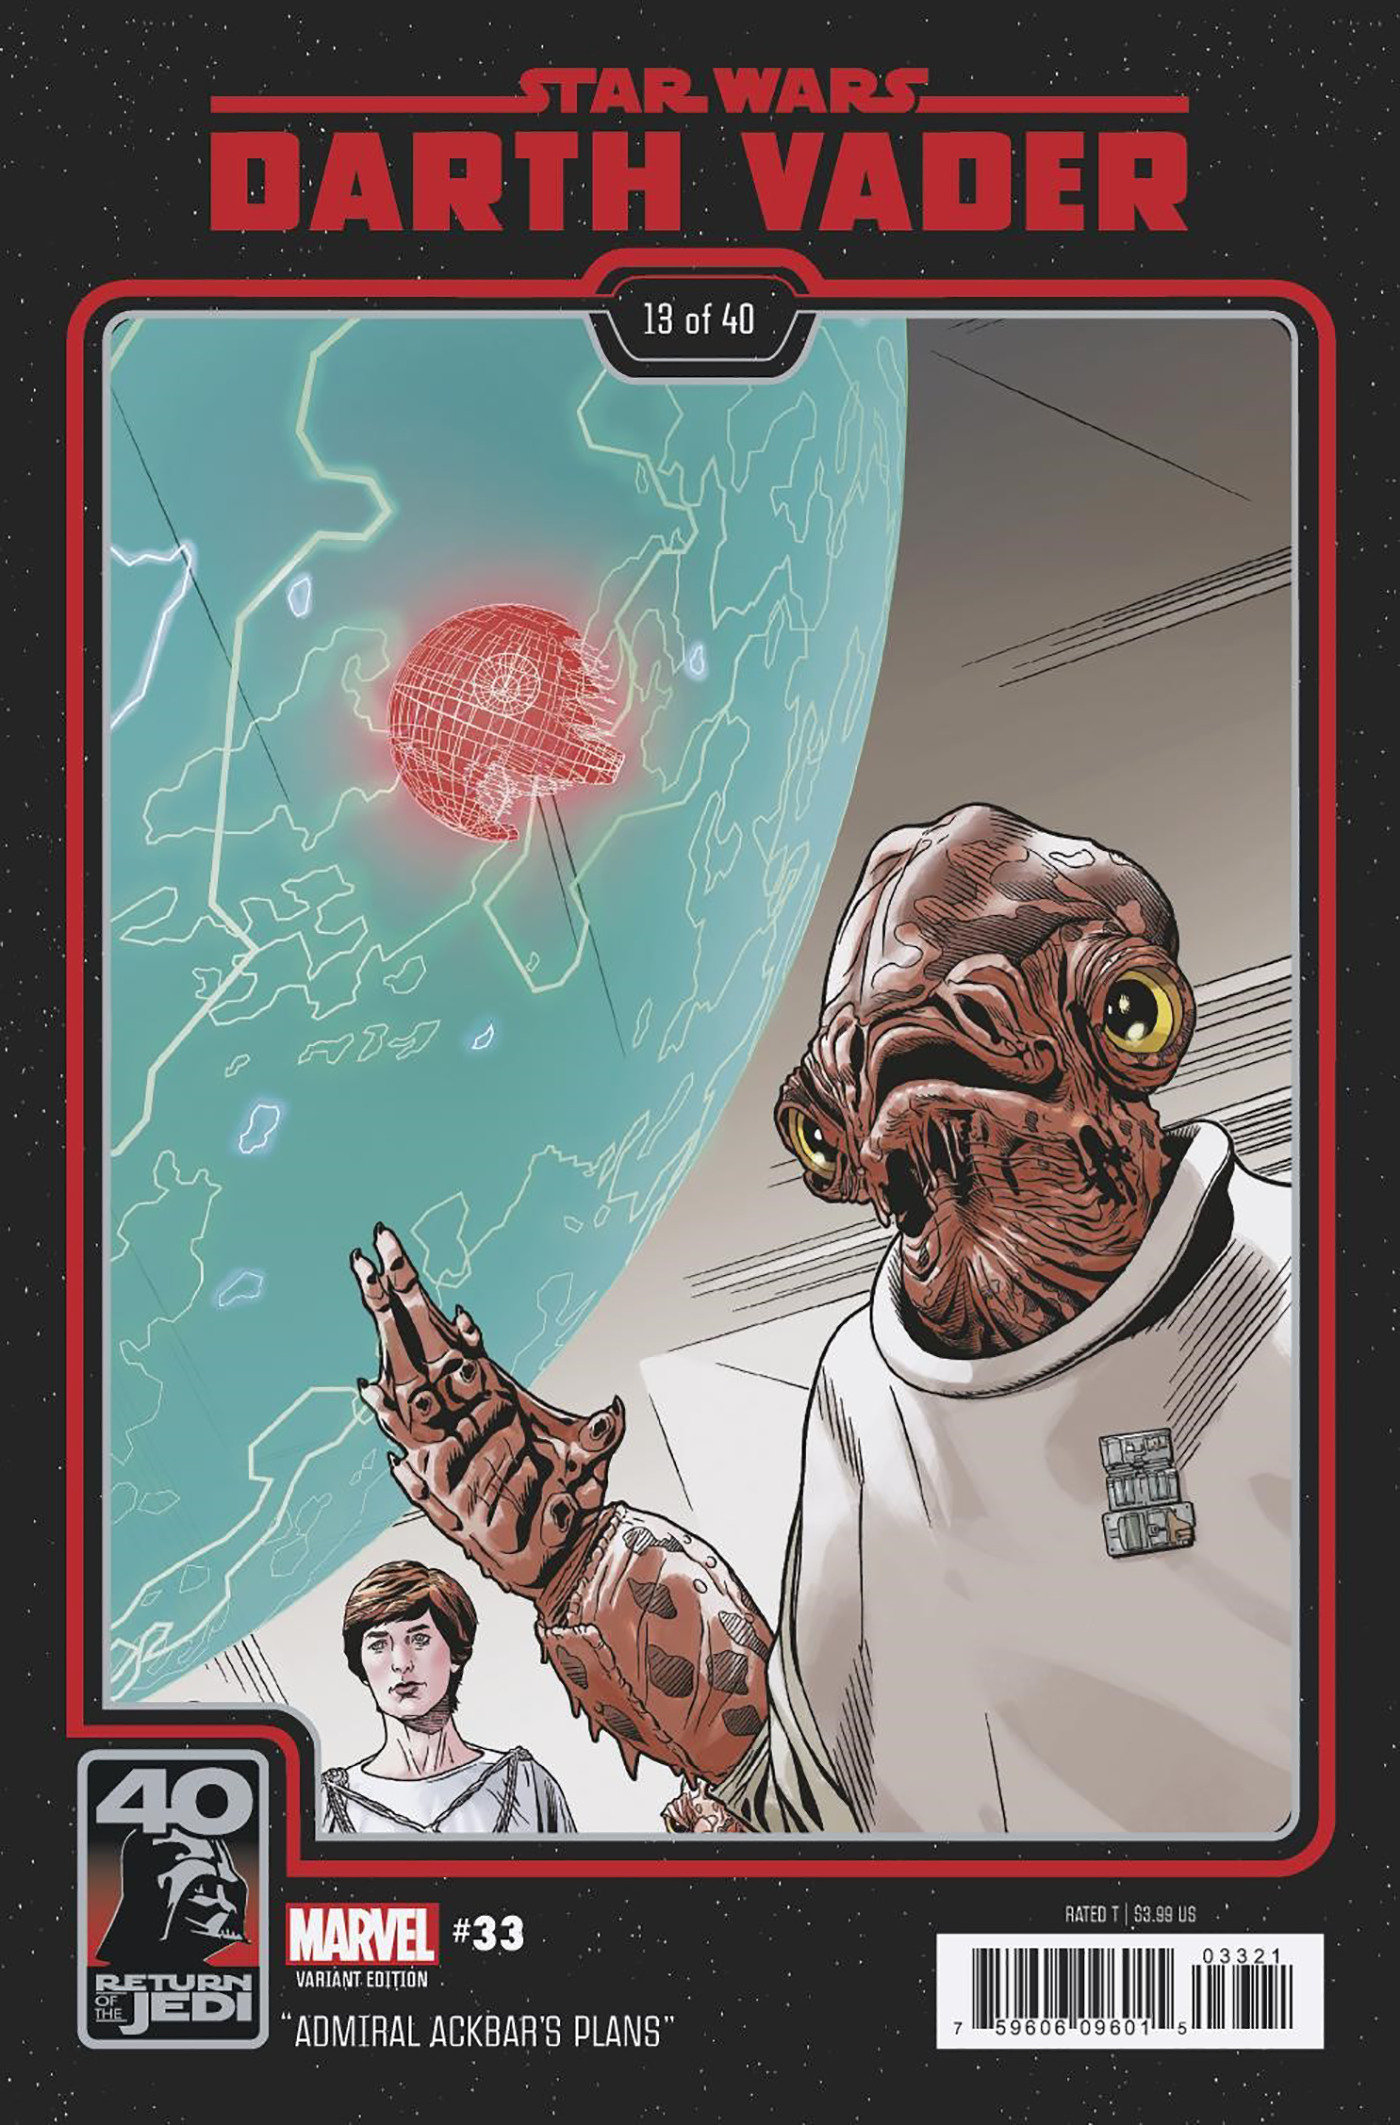 Darth Vader #33 (Chris Sprouse Return of the Jedi 40th Anniversary Variant Cover 13 of 40) (03.05.2023)